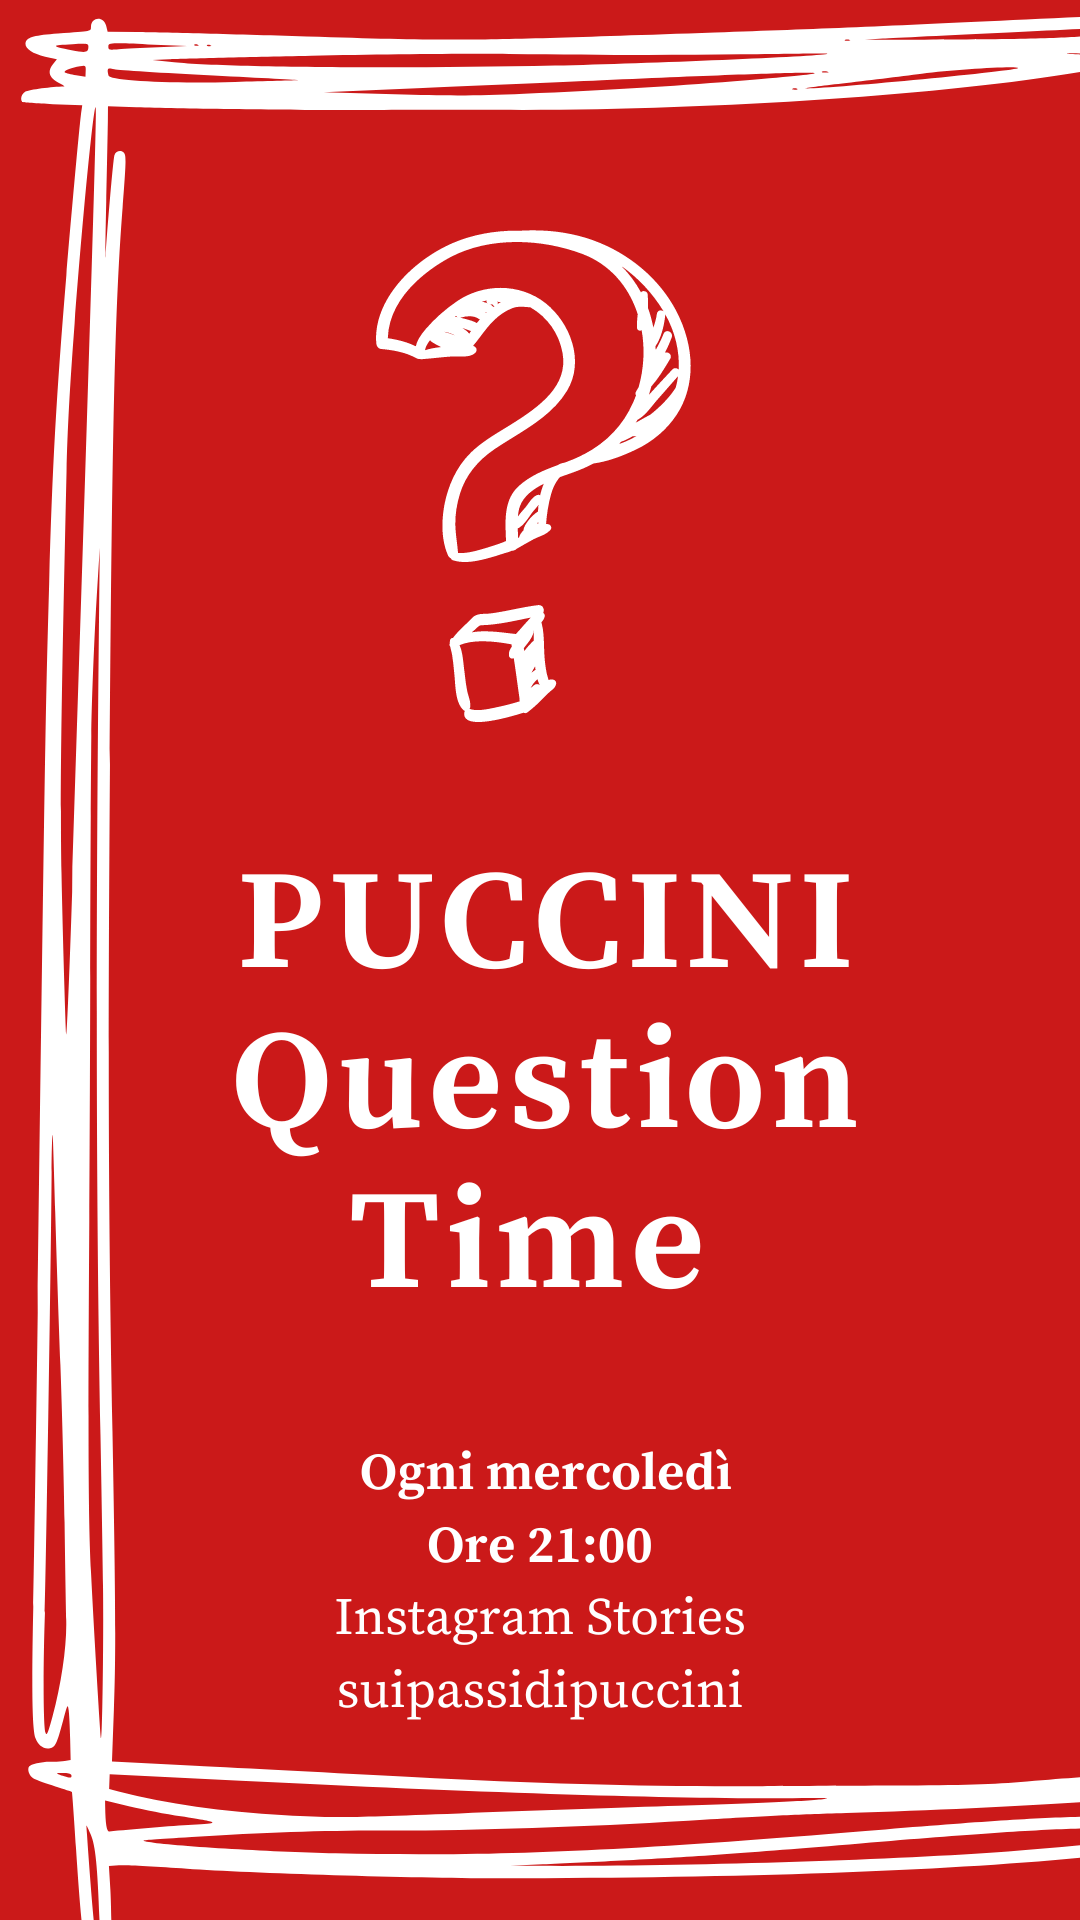 Puccini Question Time